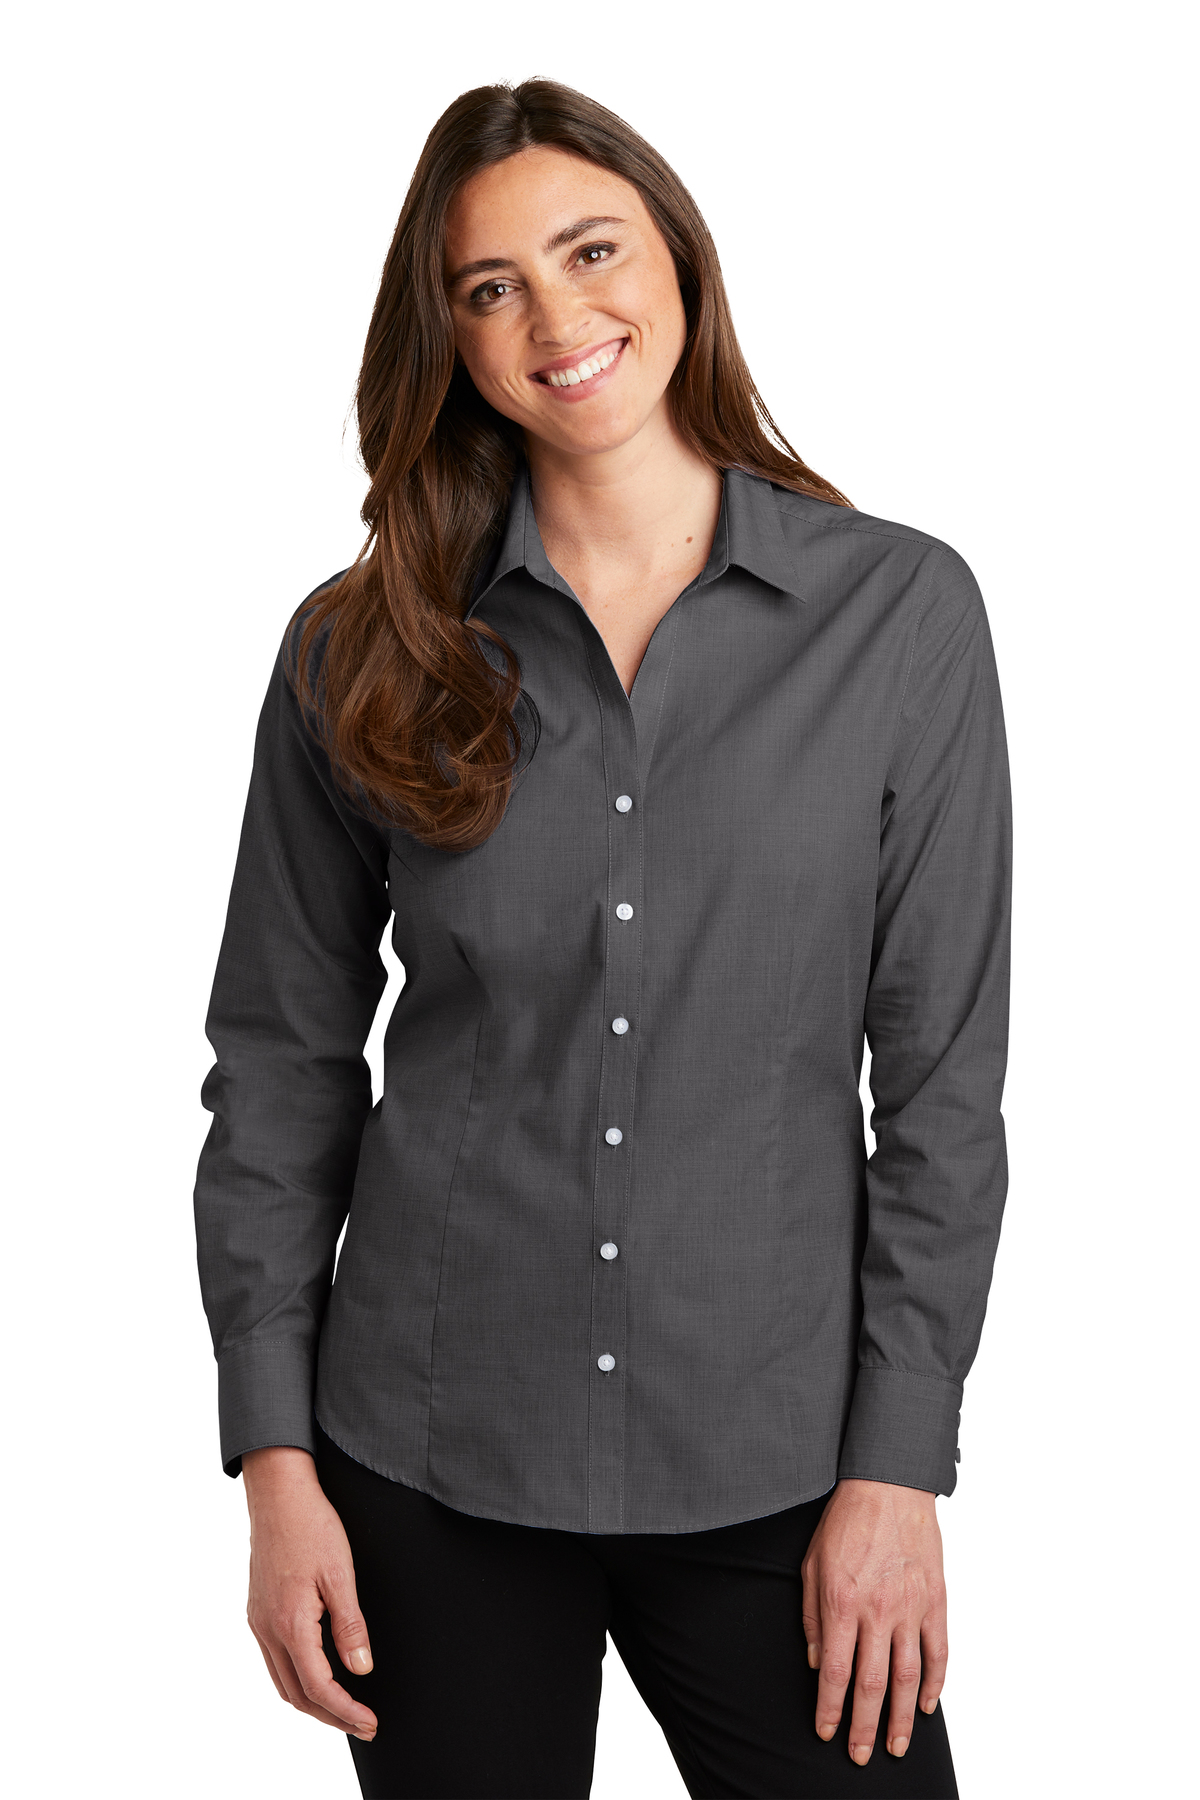 Port Authority Ladies Crosshatch Easy Care Shirt | Product | Company ...